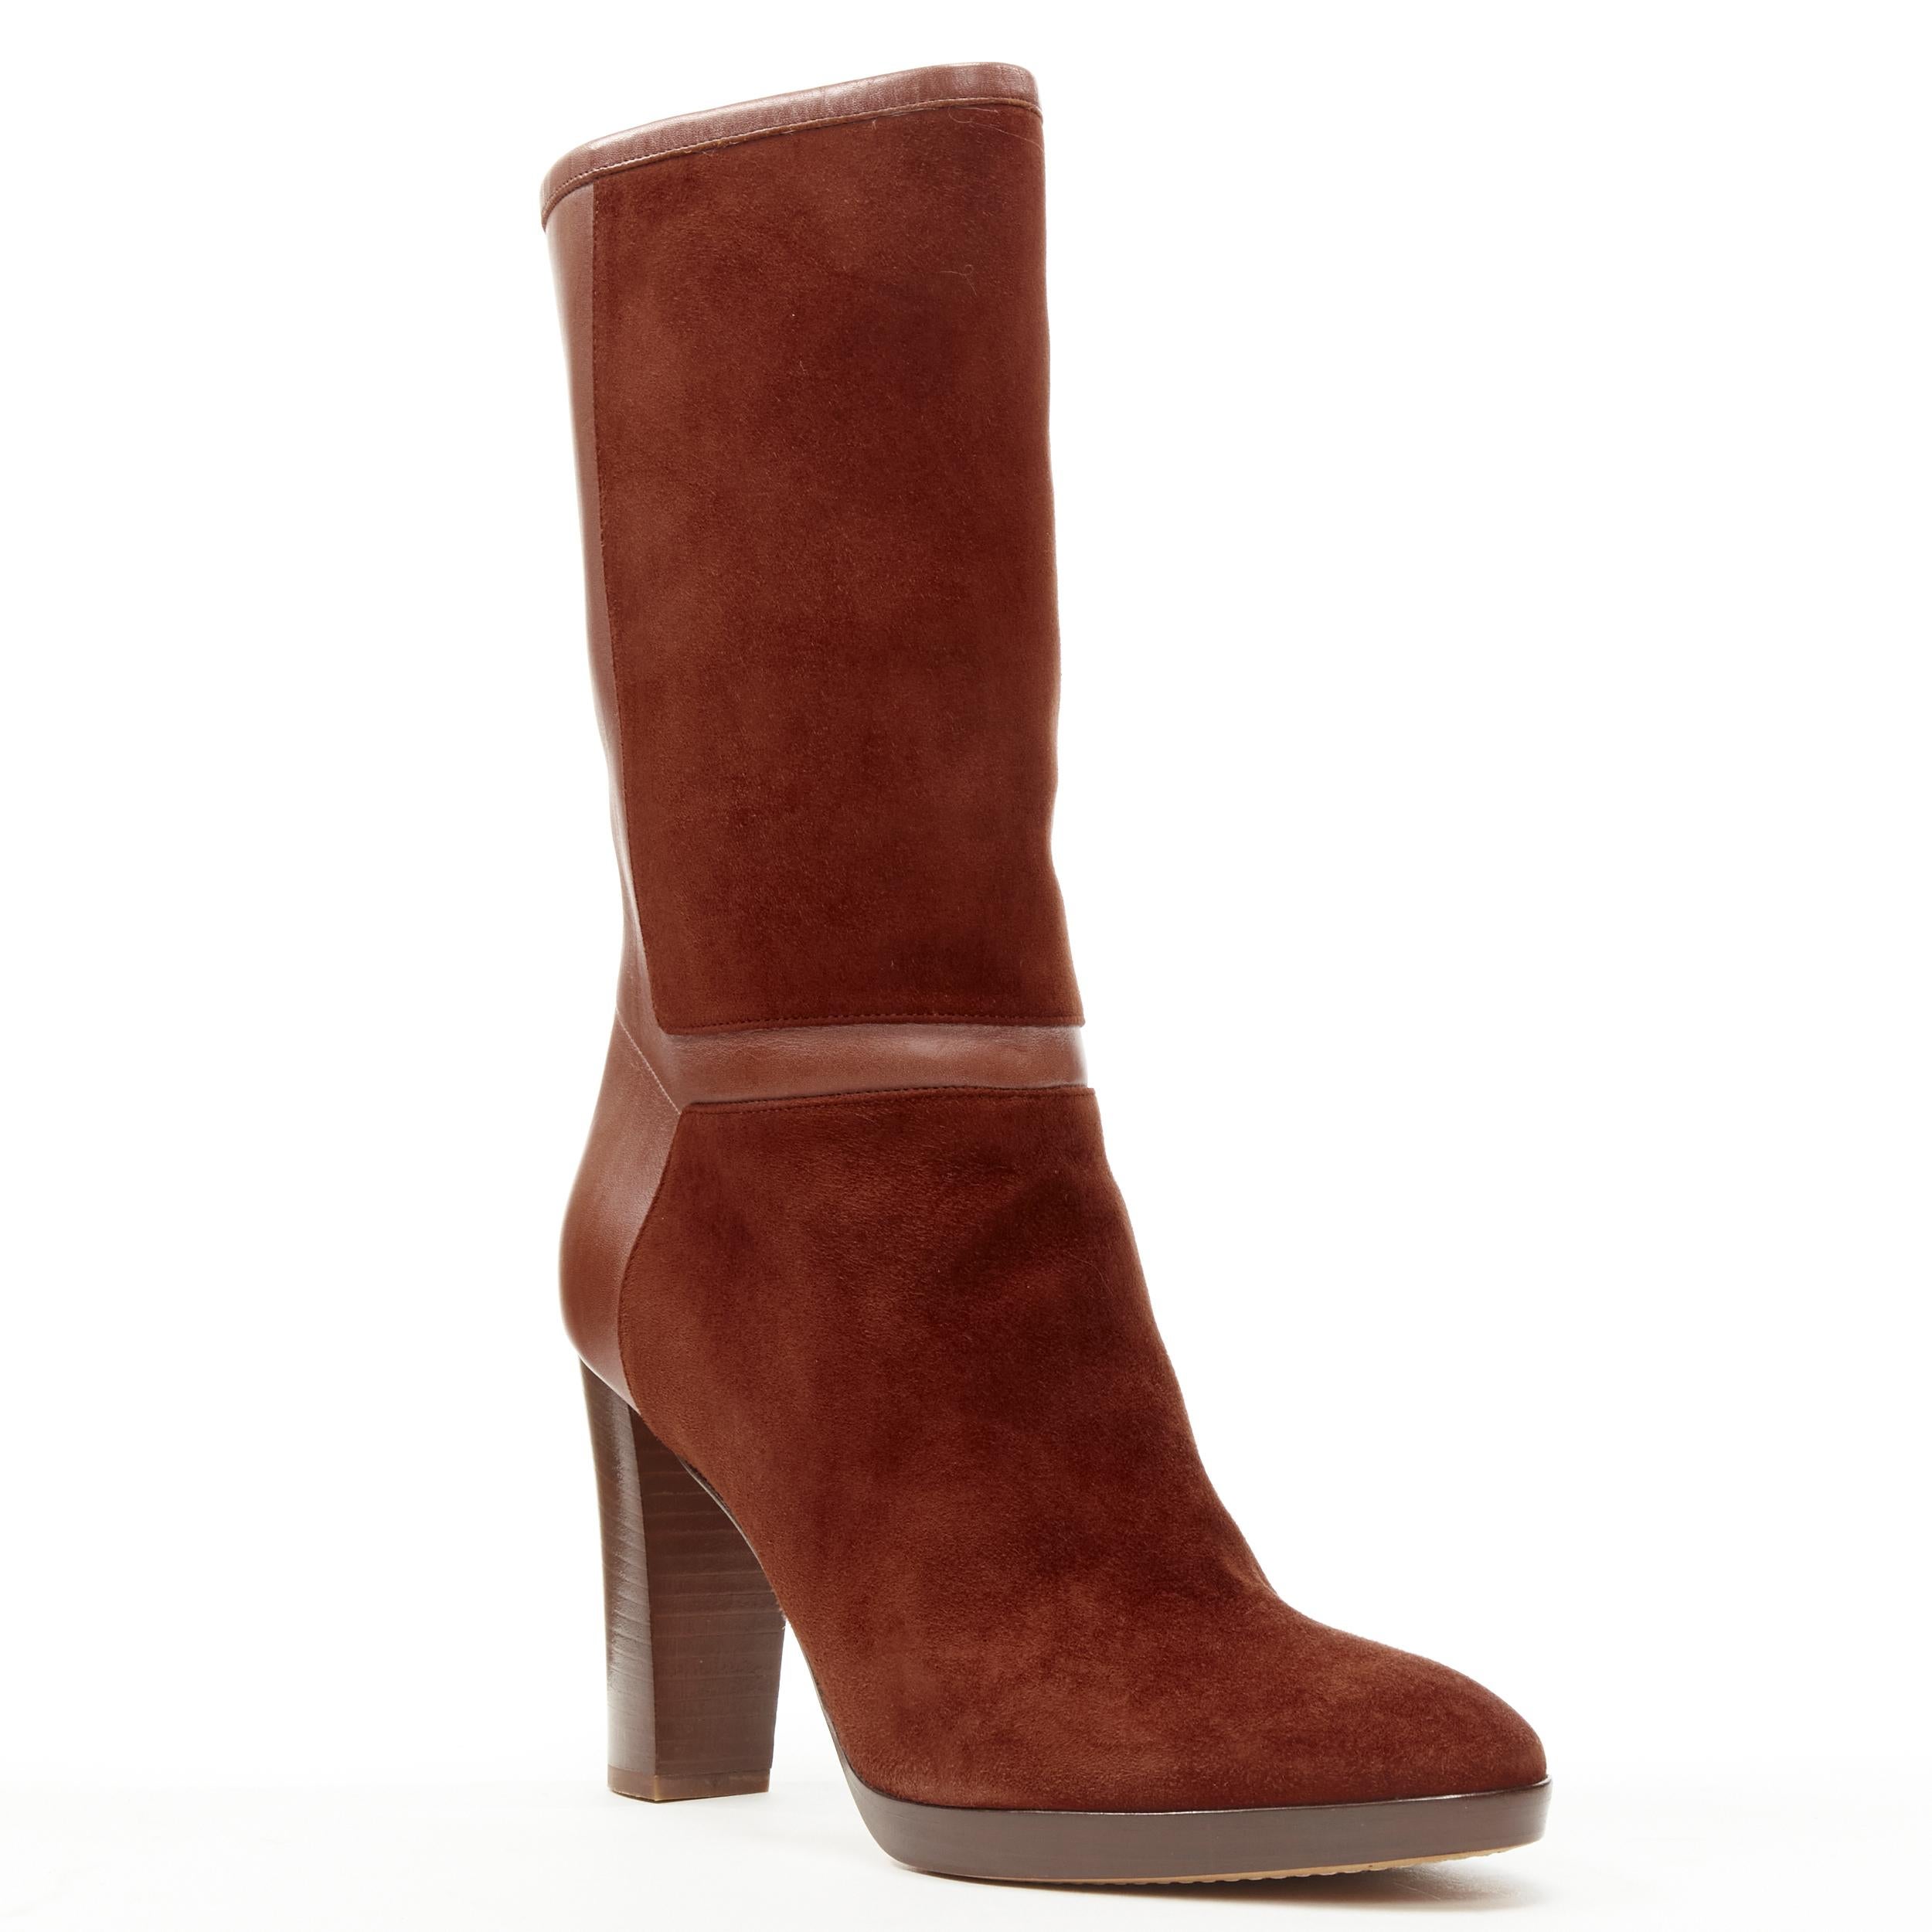 LORO PIANA Tempete Moyen Suede brown high heel pull on boots EU38 US8 
Reference: JNWG/A00017 
Brand: Loro Piana 
Material: Suede 
Color: Brown 
Pattern: Solid 
Extra Detail: Brick brown suede and leather upper. Gold-tone LP charm at back. Stacked